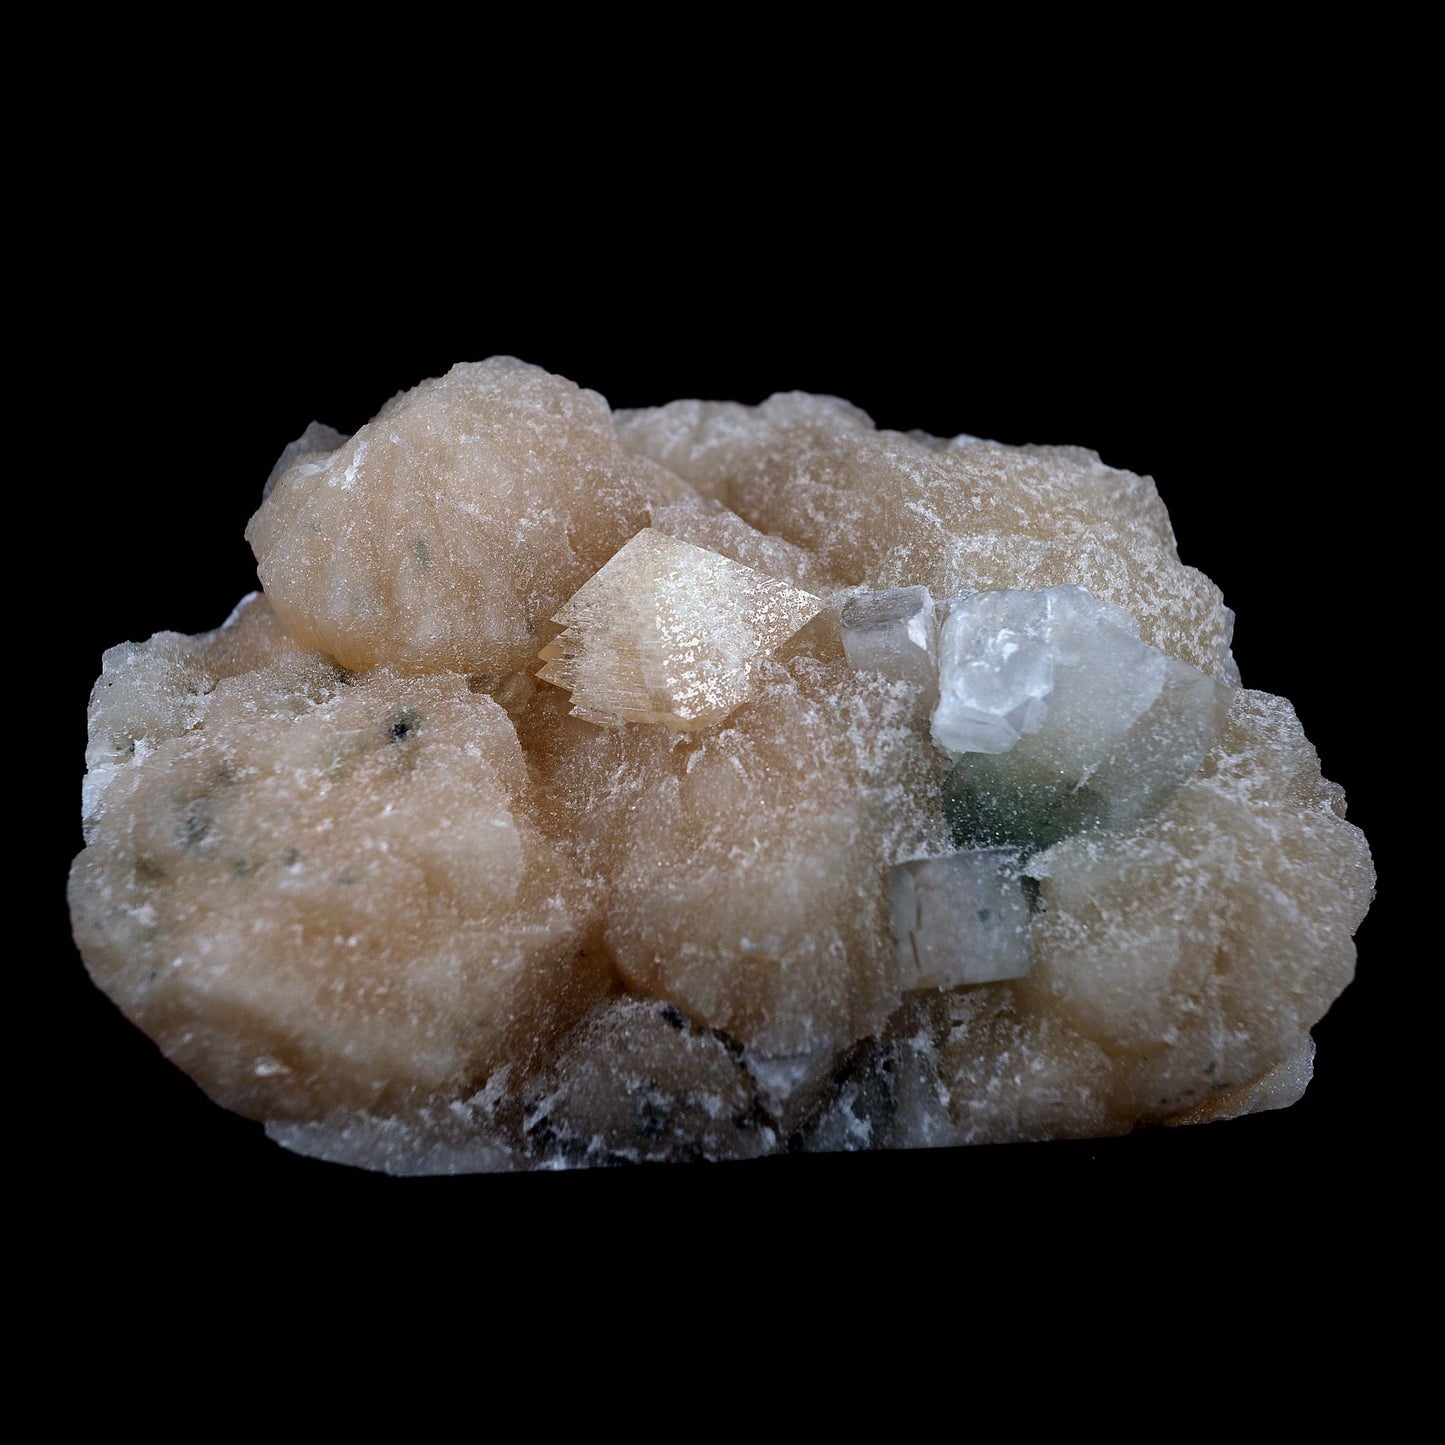 Powellite Fluorescent, Apophyllite Fuse with Stilbite Natural Mineral …  https://www.superbminerals.us/products/powellite-apophyllite-fuse-with-stilbite-natural-mineral-specimen-b-4016  Features:A well-formed pyramidal crystal of Powellite displays multiple terminations with gemmy to translucent tan-beige areas and great luster on a very well developed intergrown pink crystal matrix of Stilbite. The powellite crystals fluoresce a bright yellow, under UV light. A fine Powellite specimen from the Nashik